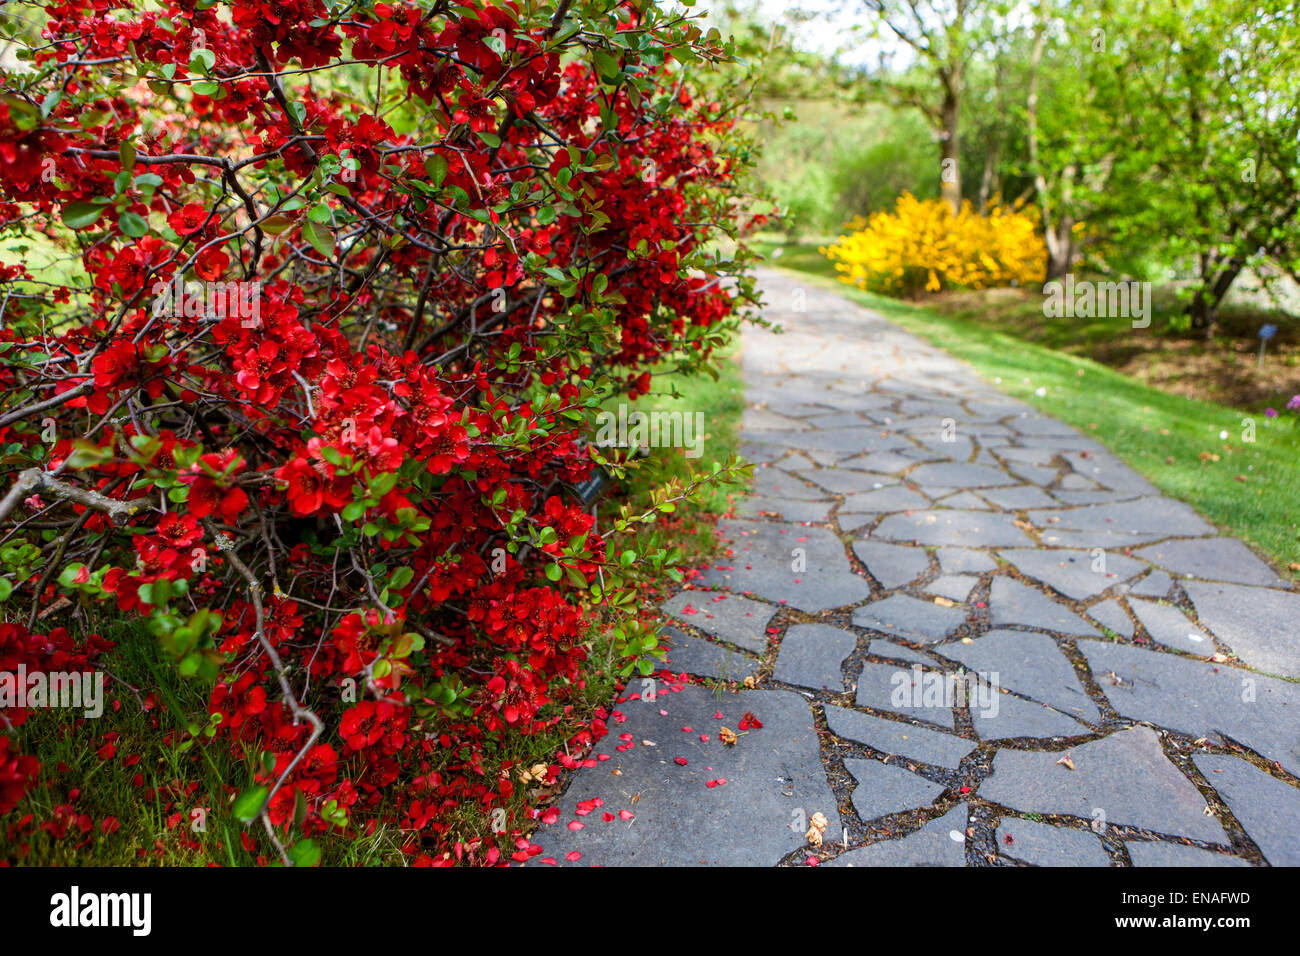 Chaenomeles japonica, red quince flowers at a flower beautiful garden path Sidewalk Stock Photo